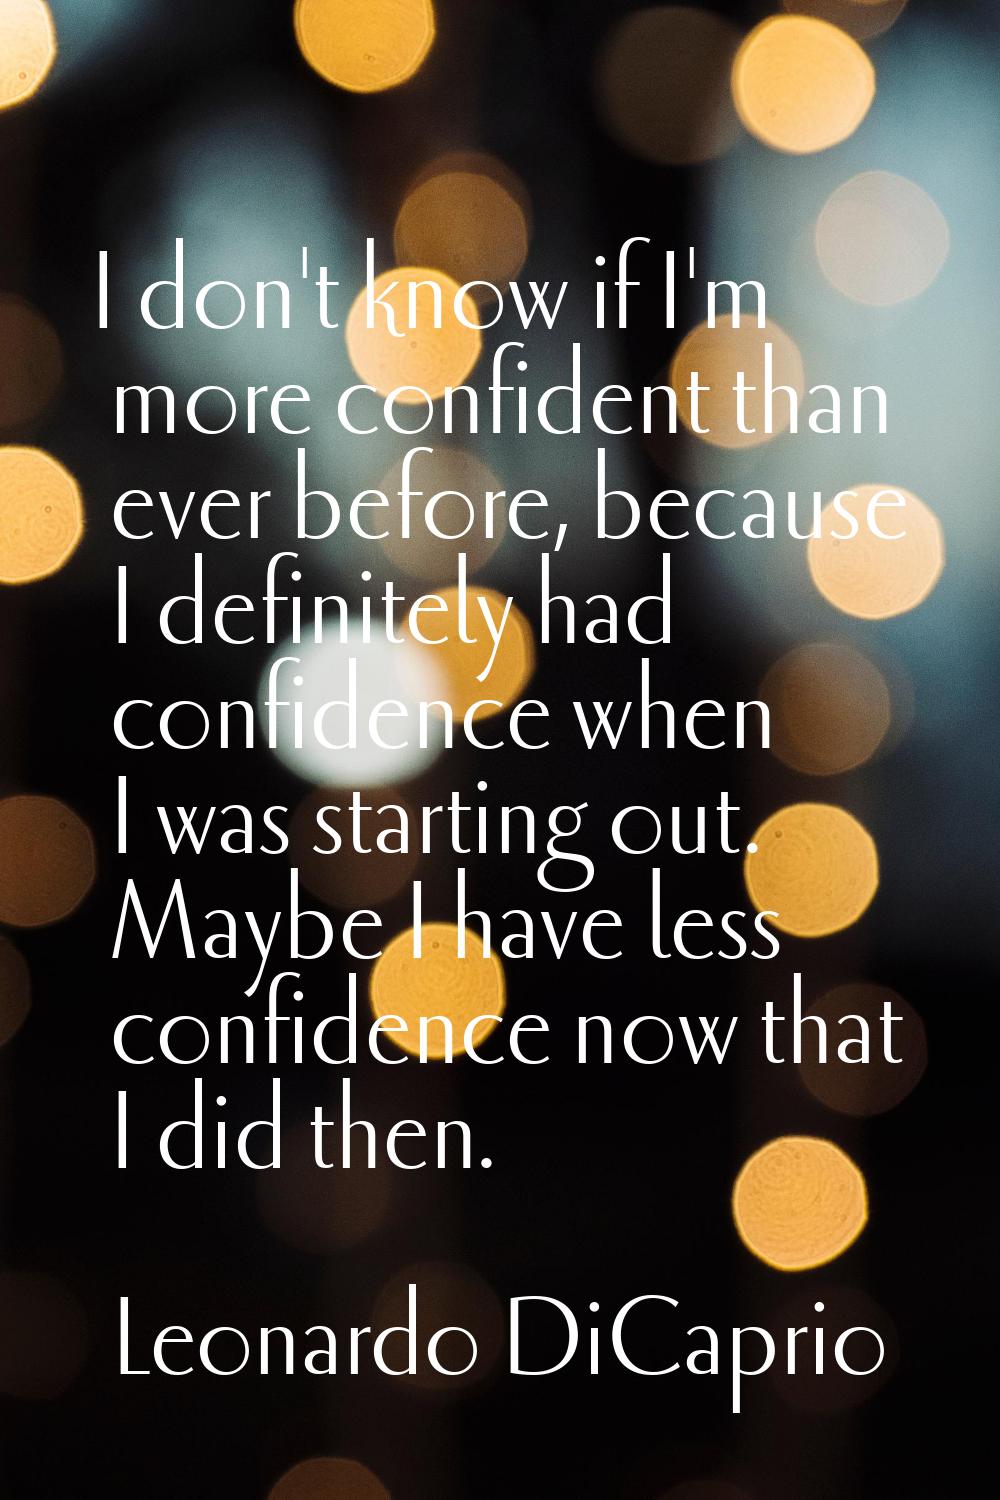 I don't know if I'm more confident than ever before, because I definitely had confidence when I was